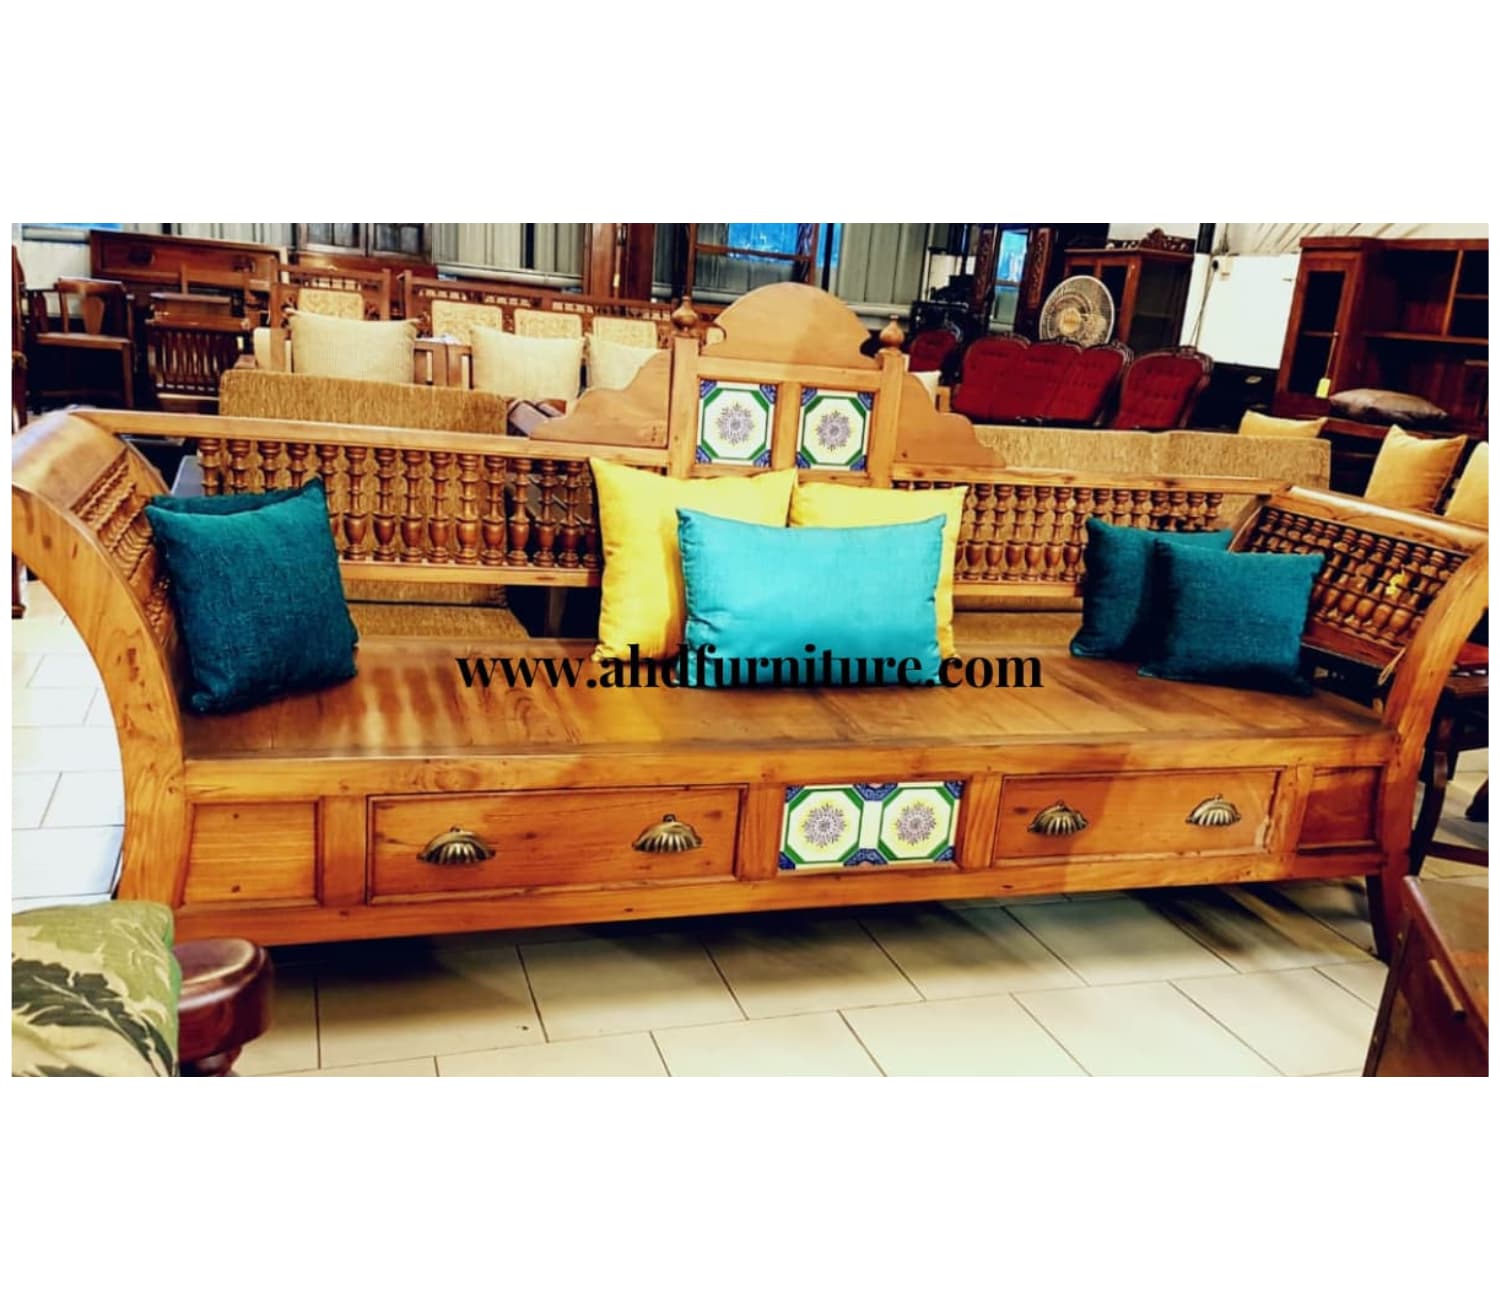 Wooden Diwan Cot Model With Drawers In Teak Wood